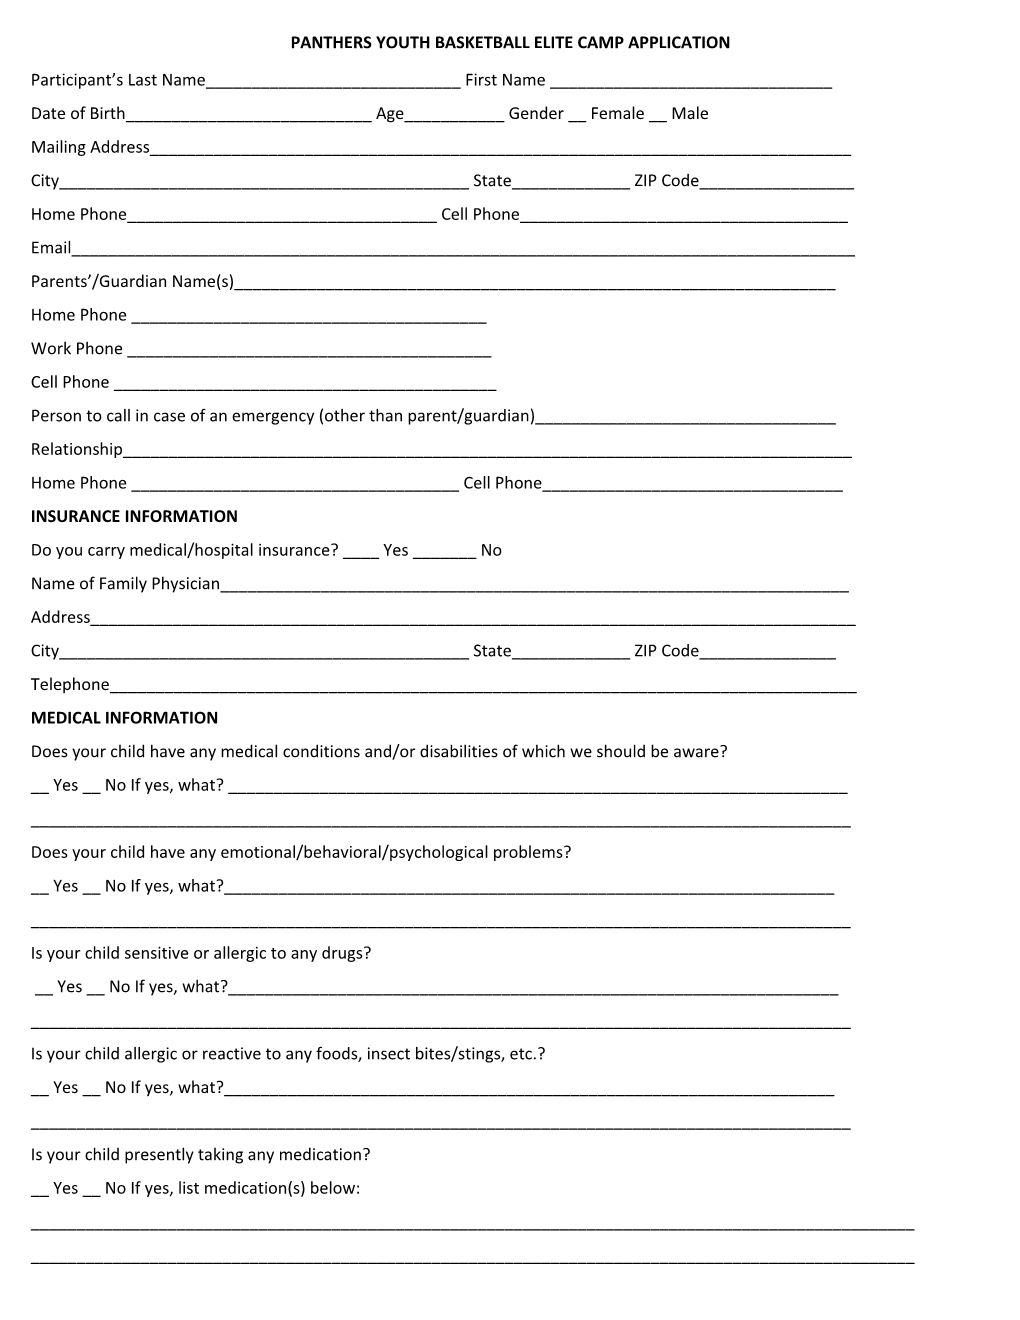 Panthers Youth Basketball Elite Camp Application